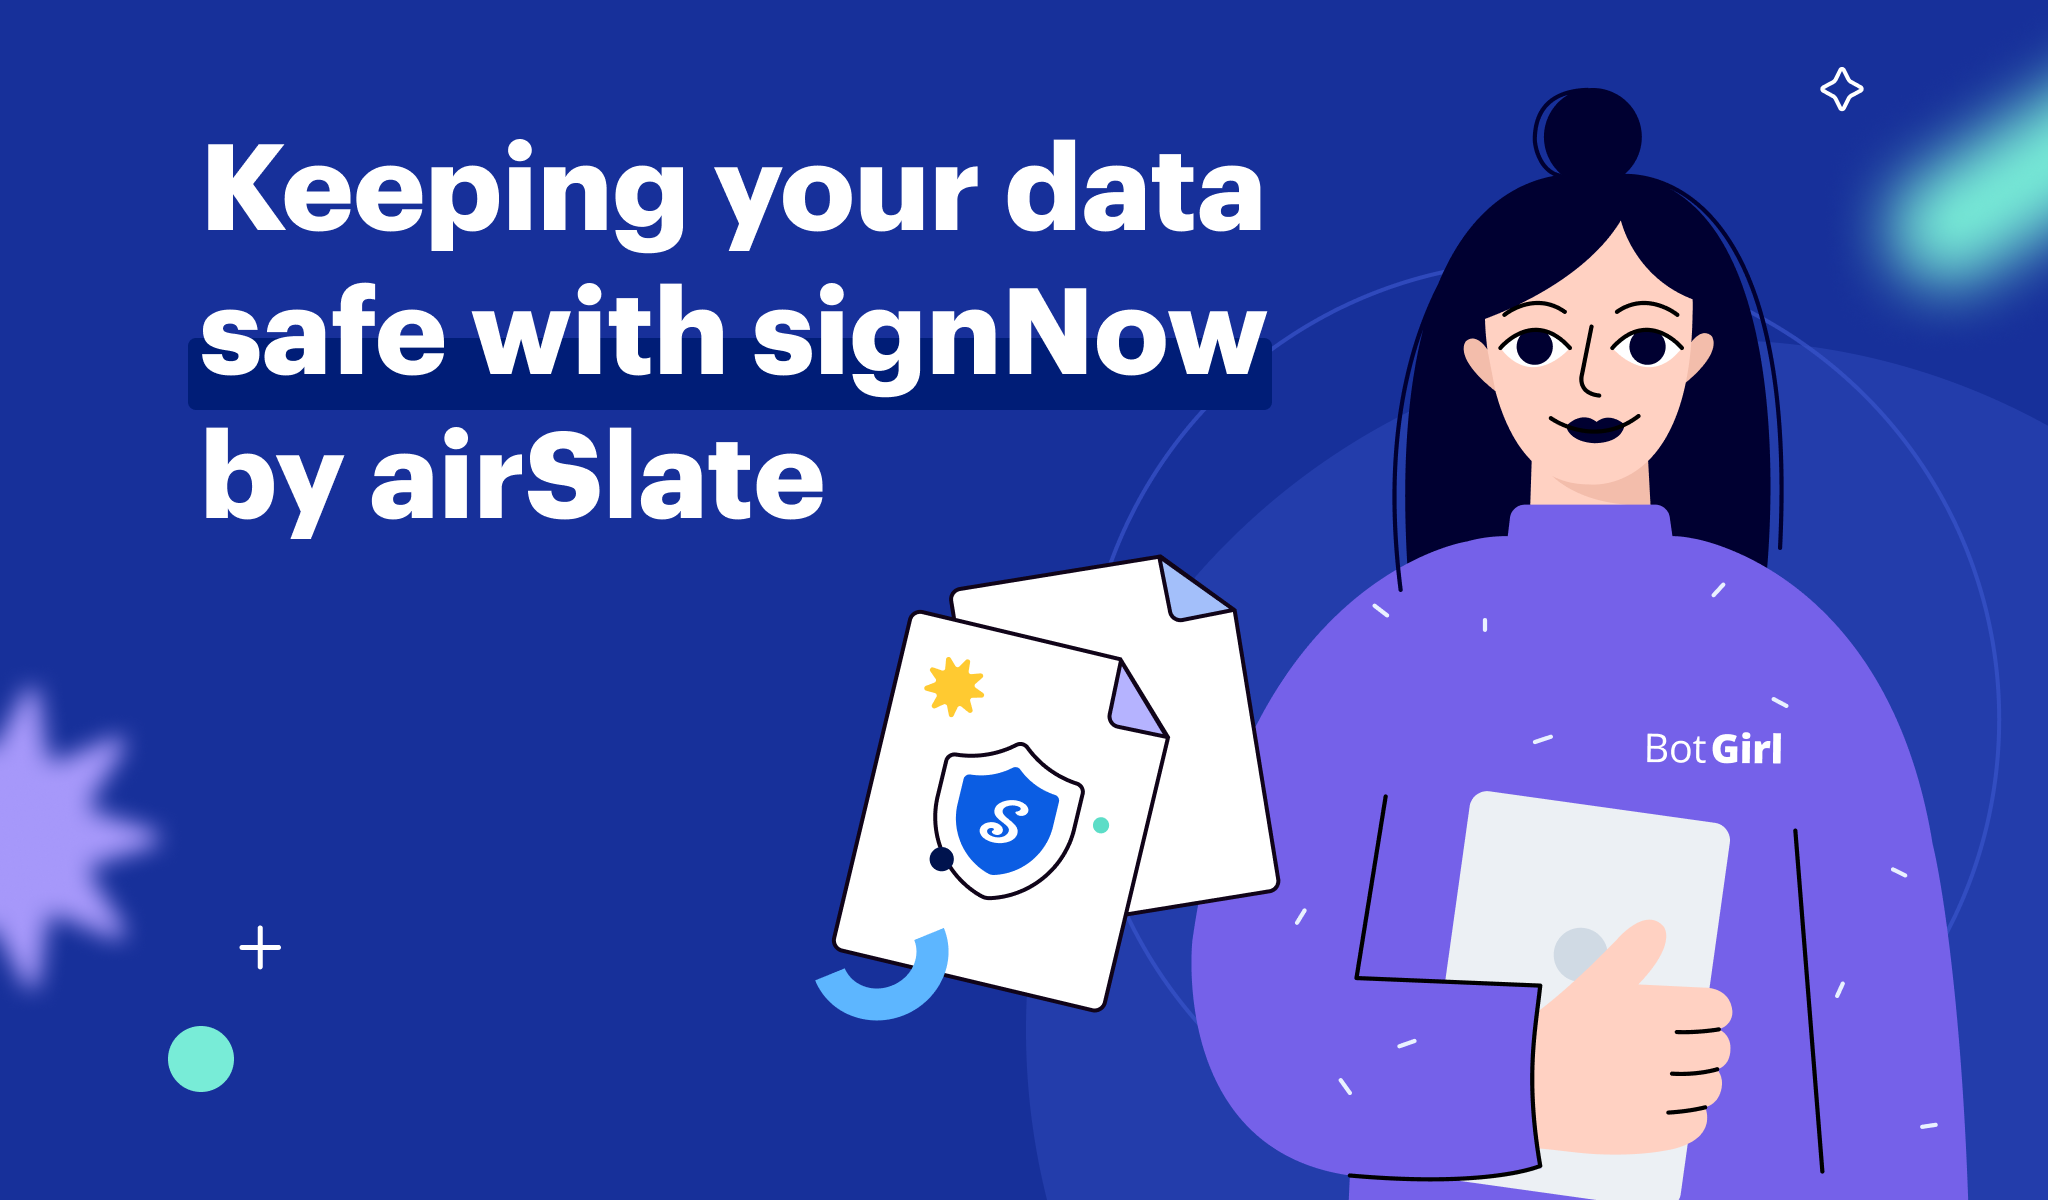 Learn how to keep your data safe and secure with signNow by airSlate